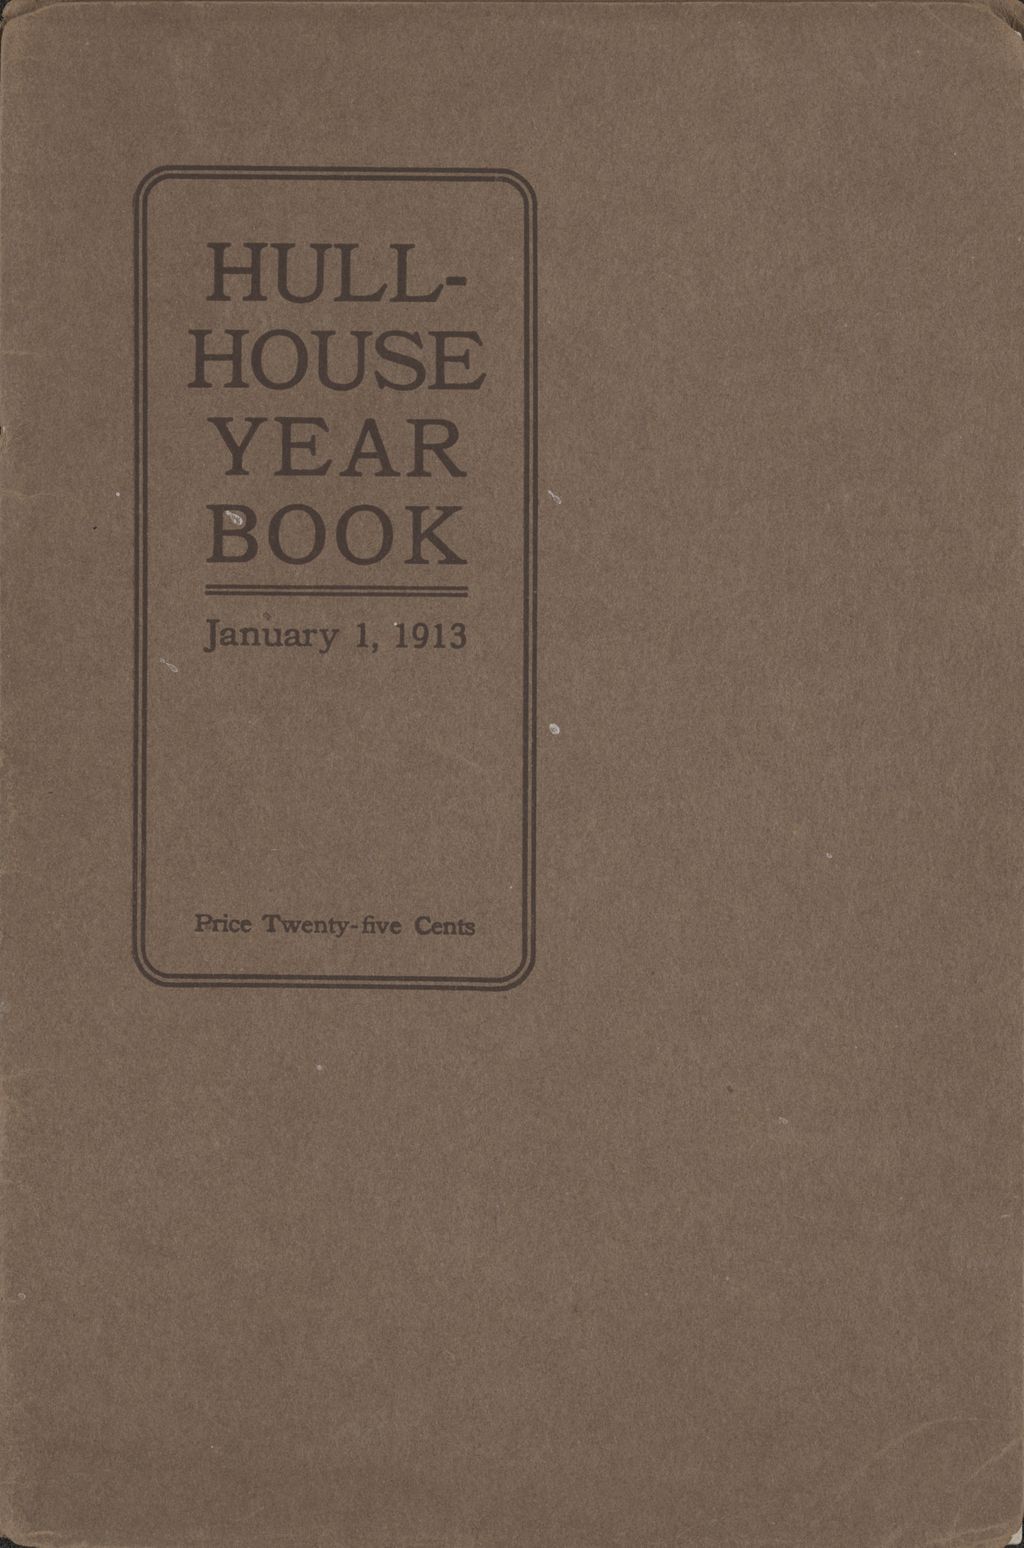 Miniature of Hull-House Year Book, 1913